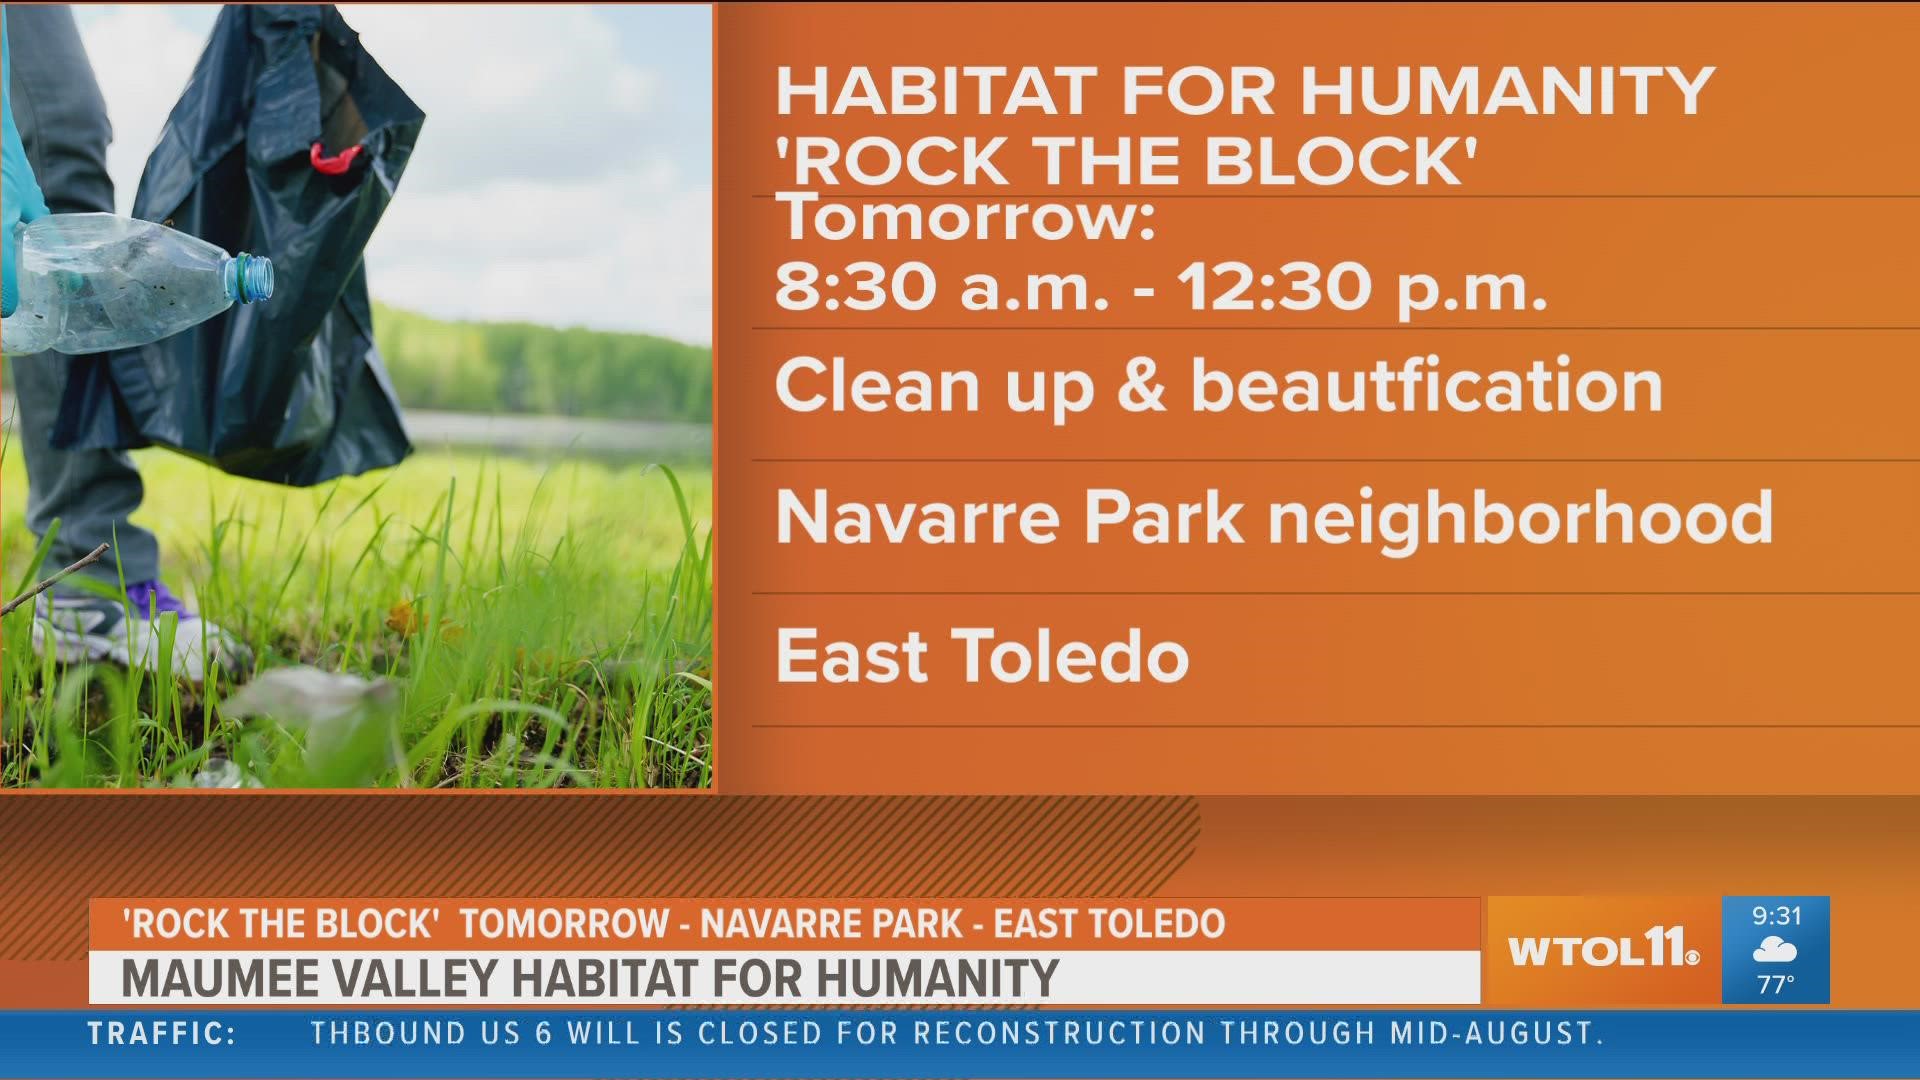 The Saturday event is hosted by Maumee Valley Habitat for Humanity and will feature landscaping, clean up and homeownership skills. A family fun party will follow.